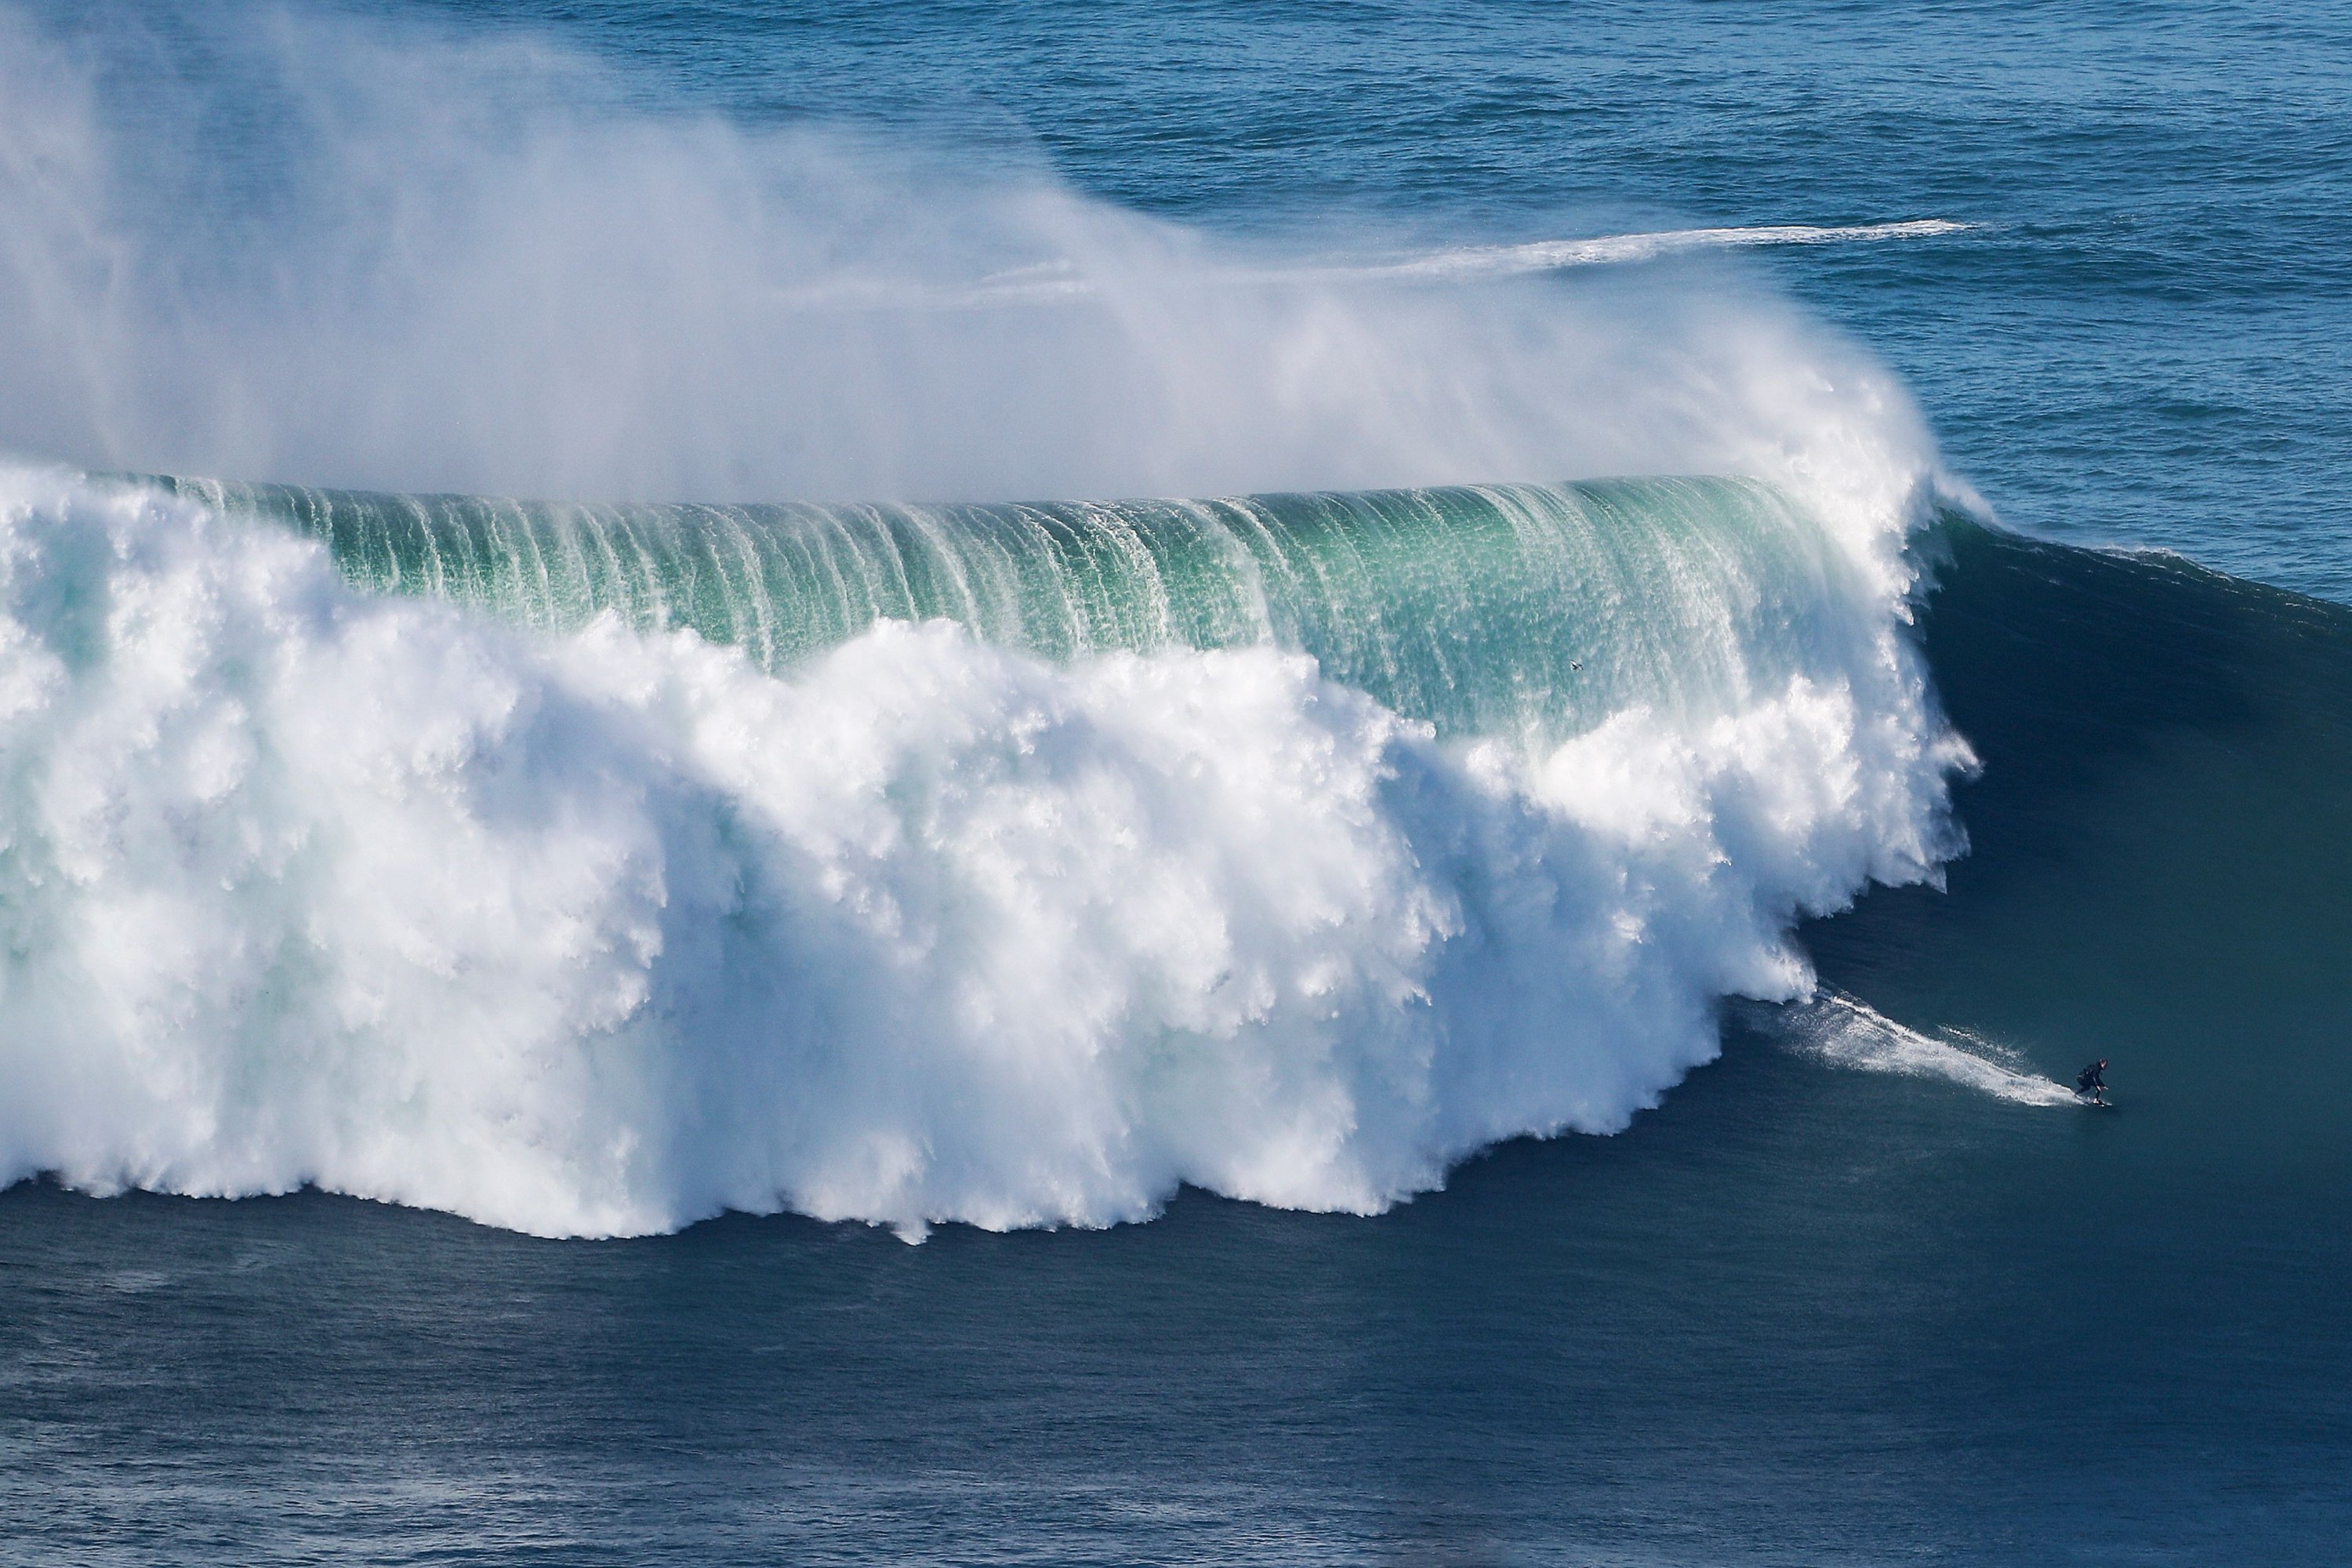 Hurricanegenerated swell draws big wave surfers to Portugal's Nazare